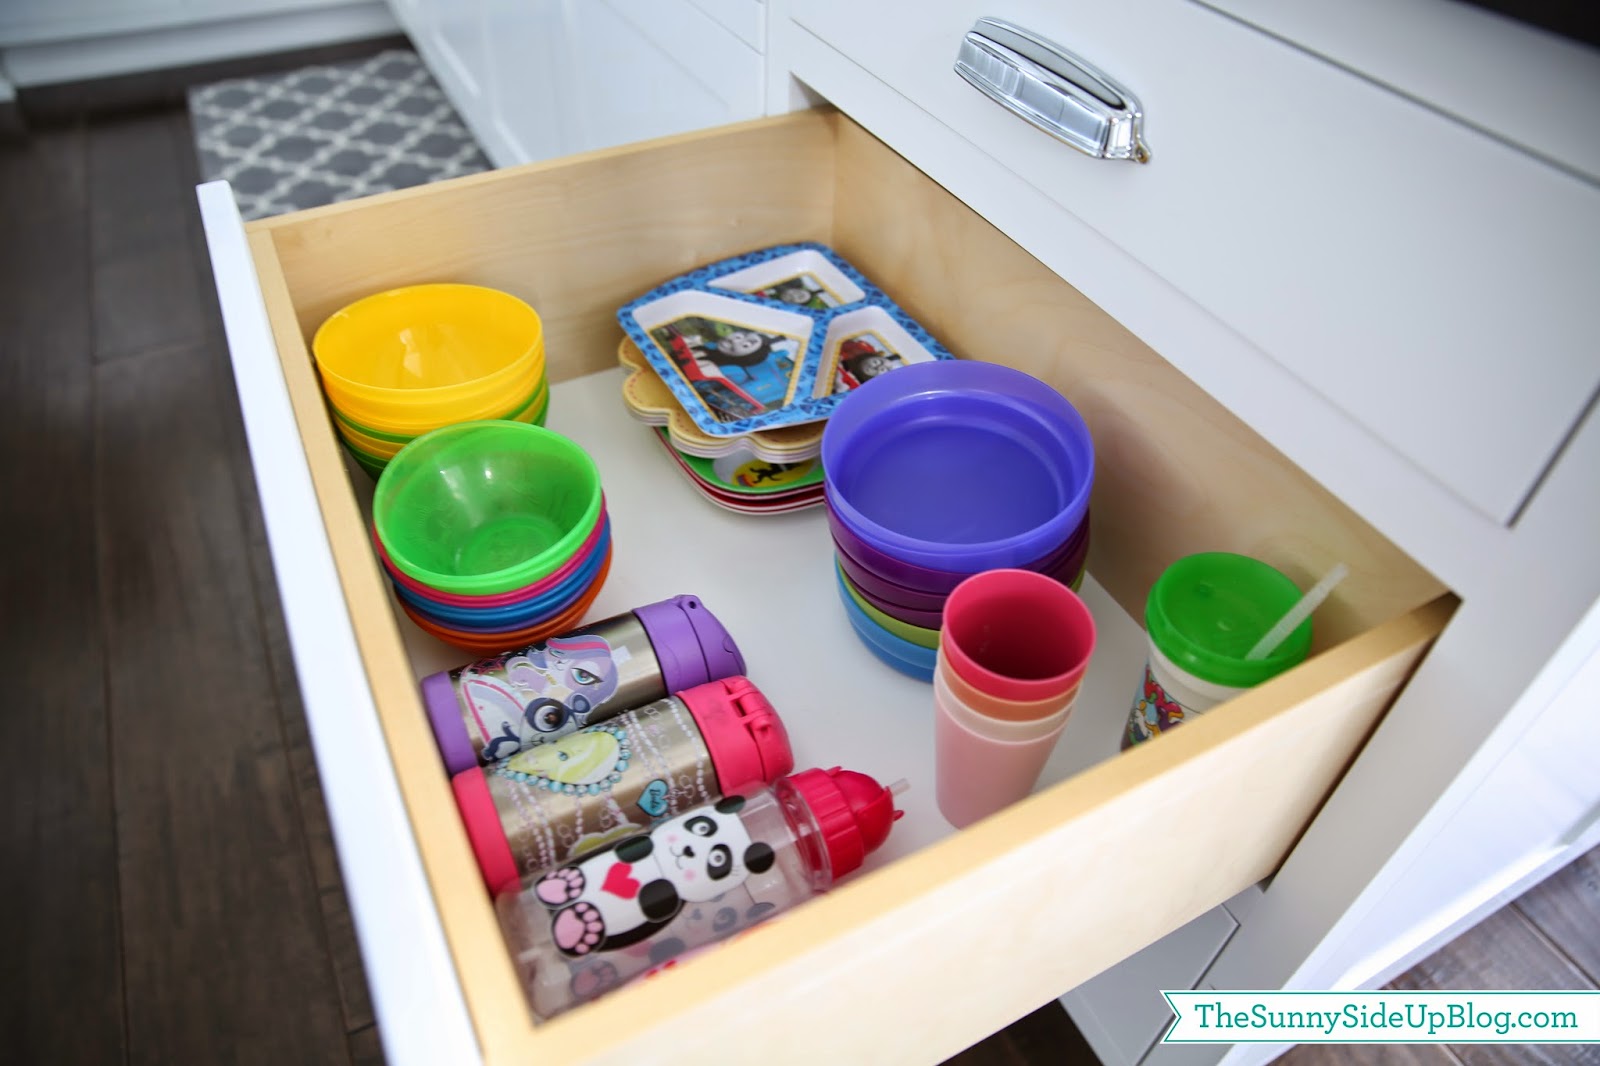 https://www.thesunnysideupblog.com/wp-content/uploads/2014/04/kids-cup-and-plate-drawer.jpg